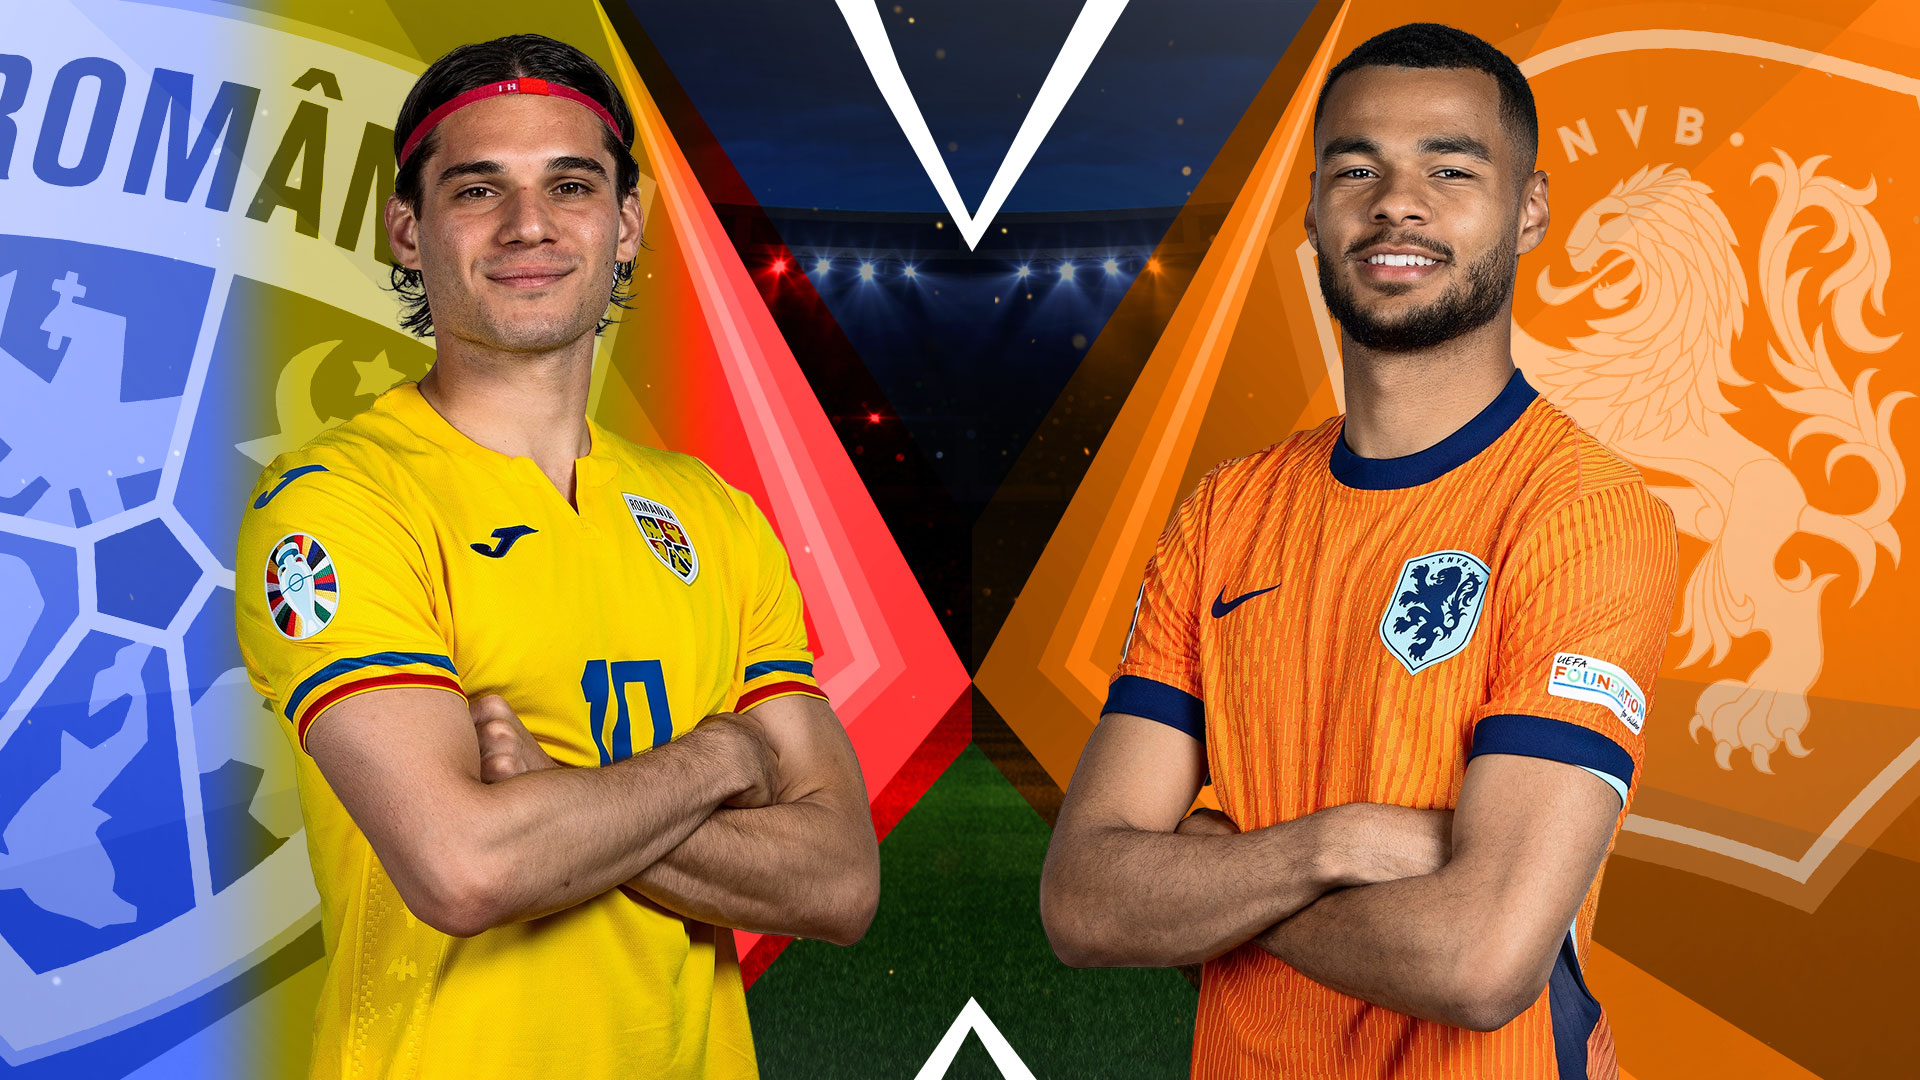 Romania vs Netherlands LIVE commentary: Kick-off time, score, line-ups and Euro 2024 match preview as under-pressure Dutch face tough test in last-16